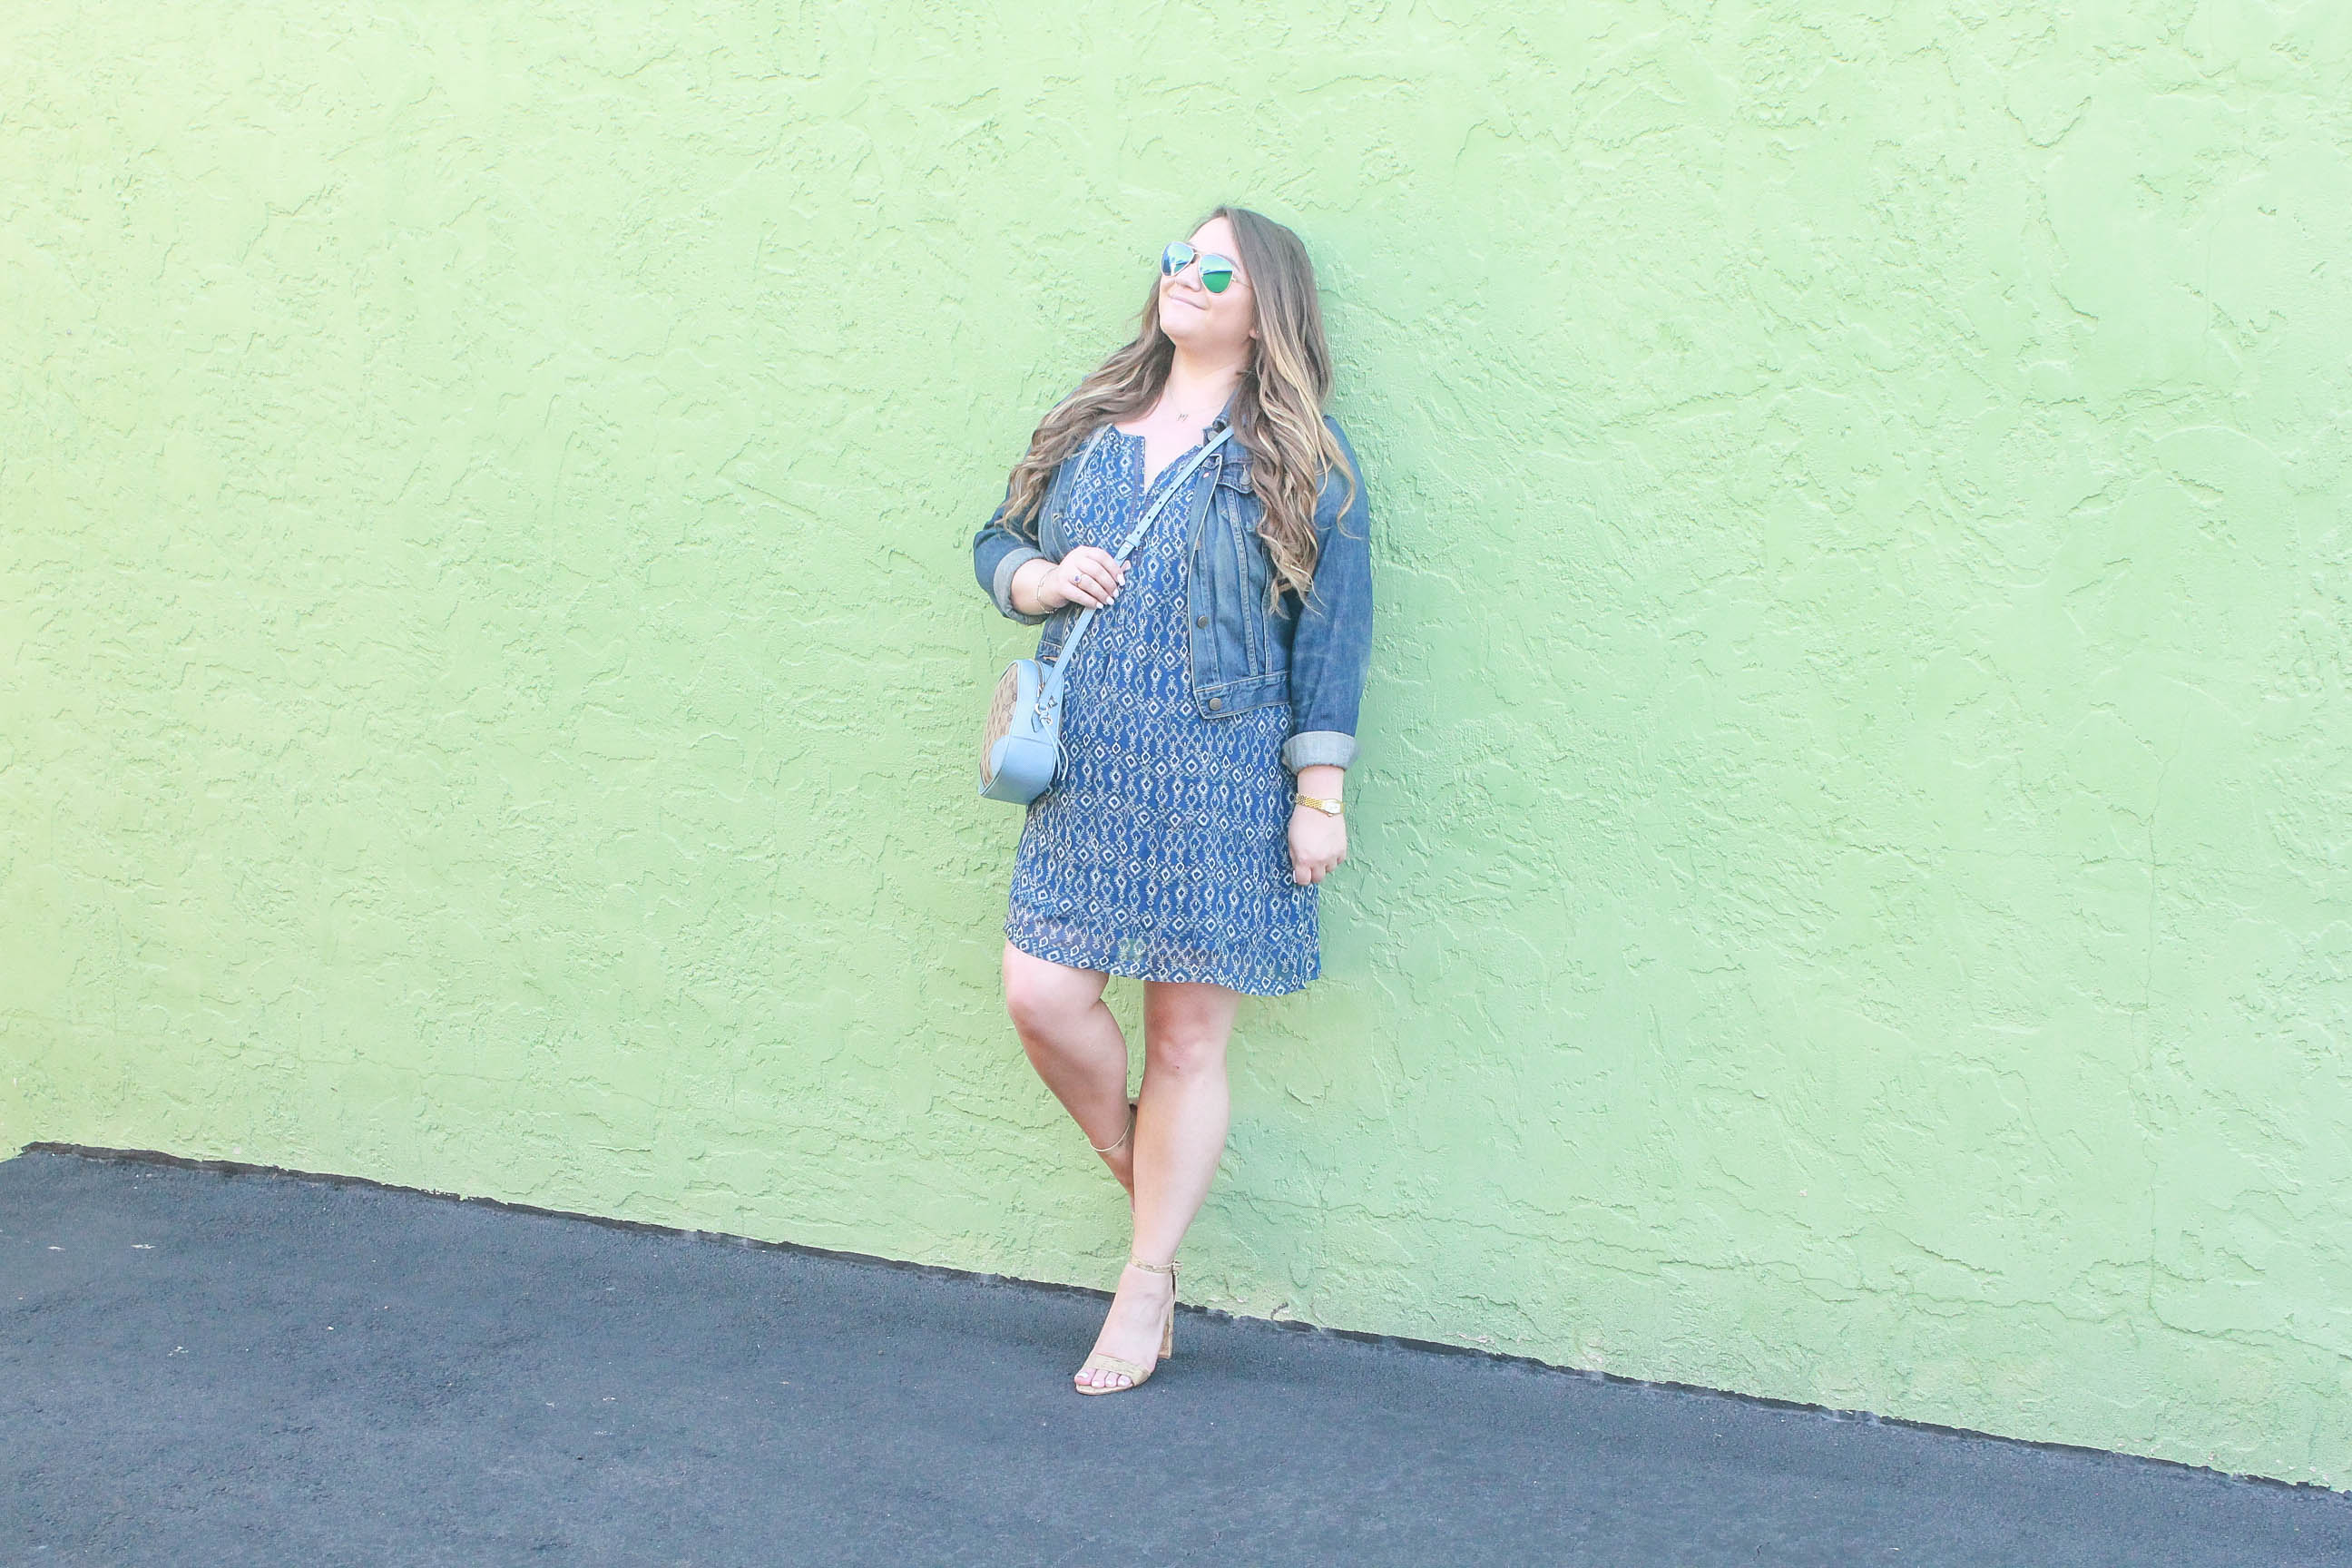 missyonmadison, missyonmadison blog, missyonmadison instagram, bloglovin, outfit inspo, first day of spring, spring style, spring style 2018, spring 2018 outfit inspo,fashion blog, fashion blogger, ootd, fashion blogger los angeles, la, la blogger, melissa tierney, tart collections, tart collections dress, old navy denim jacket, womens denim jacket, cork ankle strap heels, cork sandals, spring shoes, spring sandals, gucci camera bag, le specs sunglasses, wall crawl, style blogger, gucci crossbody bag,